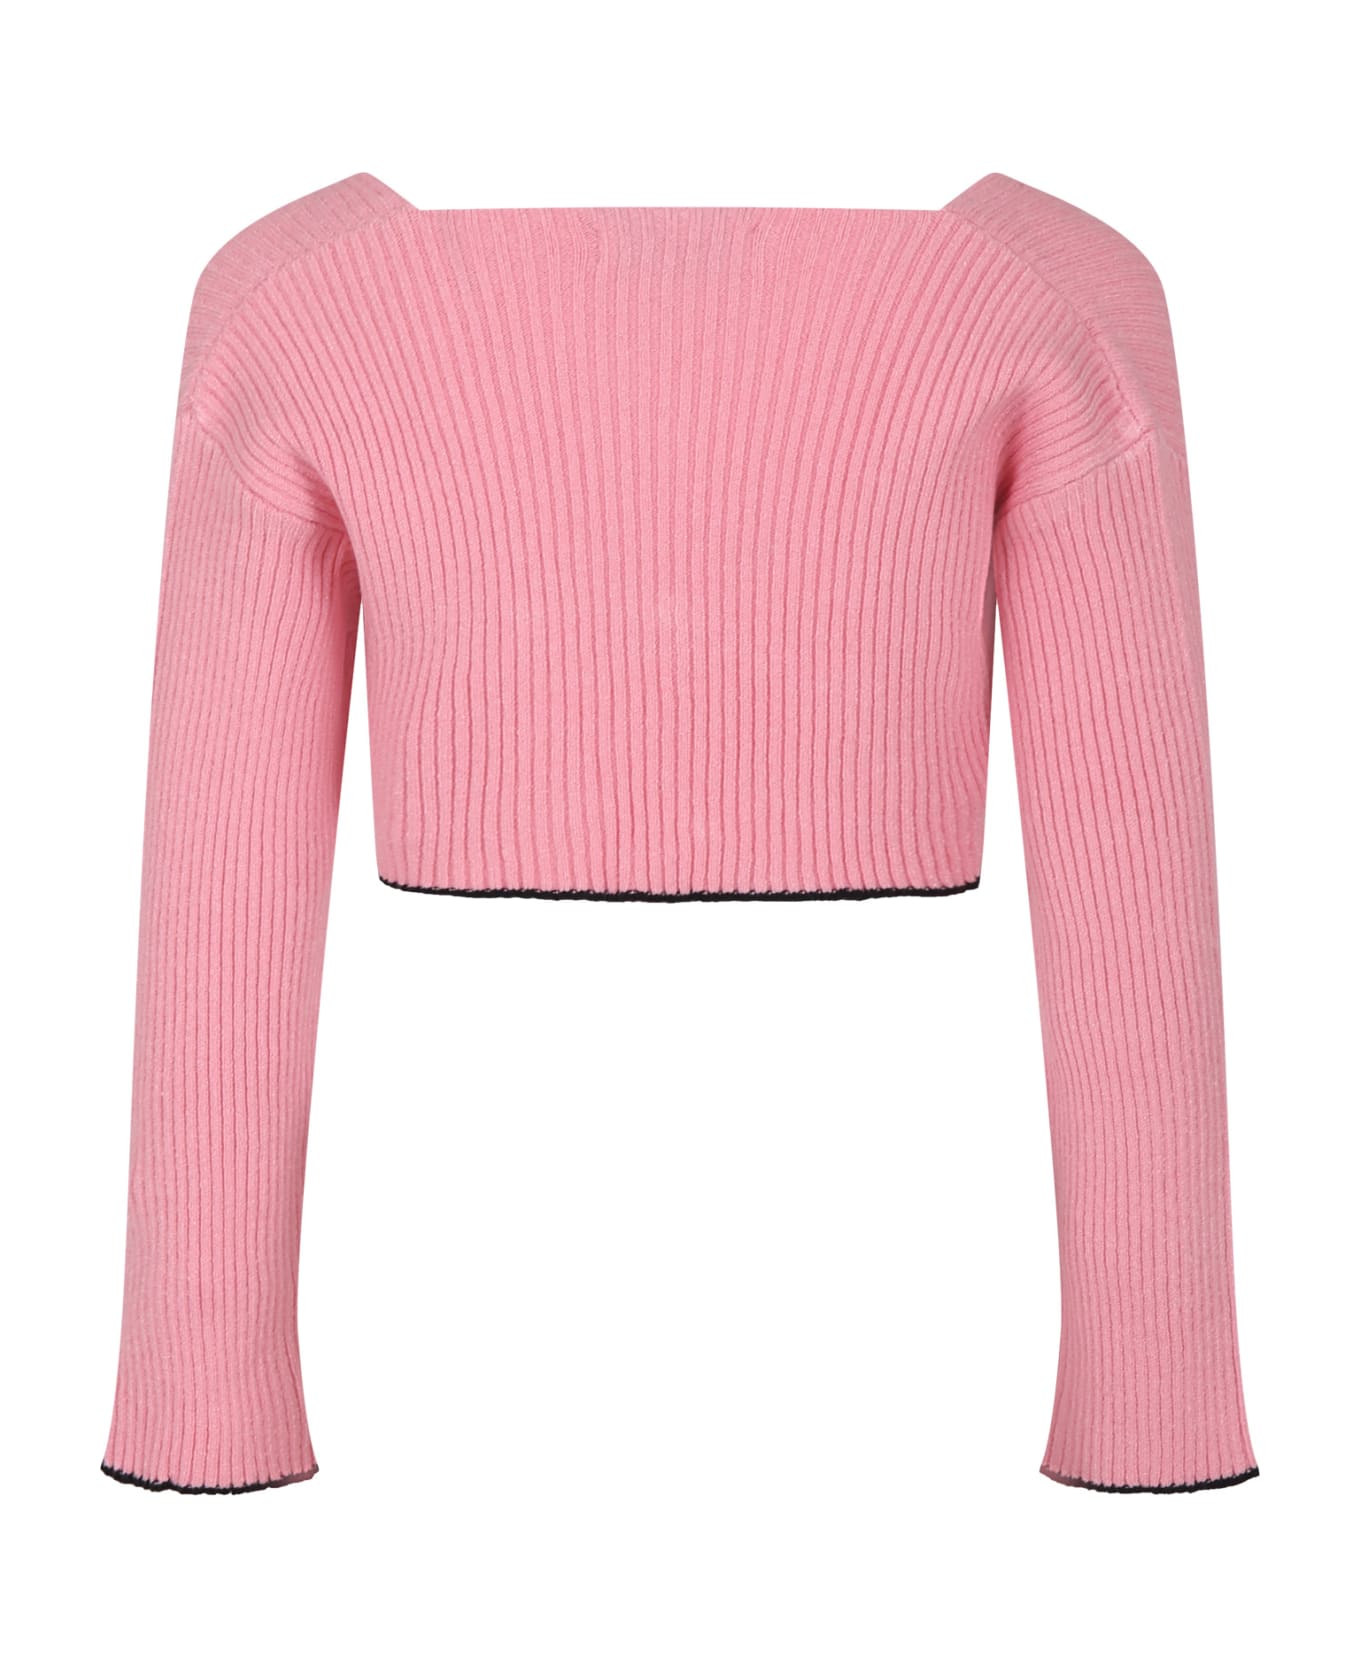 MSGM Pink Cardigan For Girl With Logo - Pink